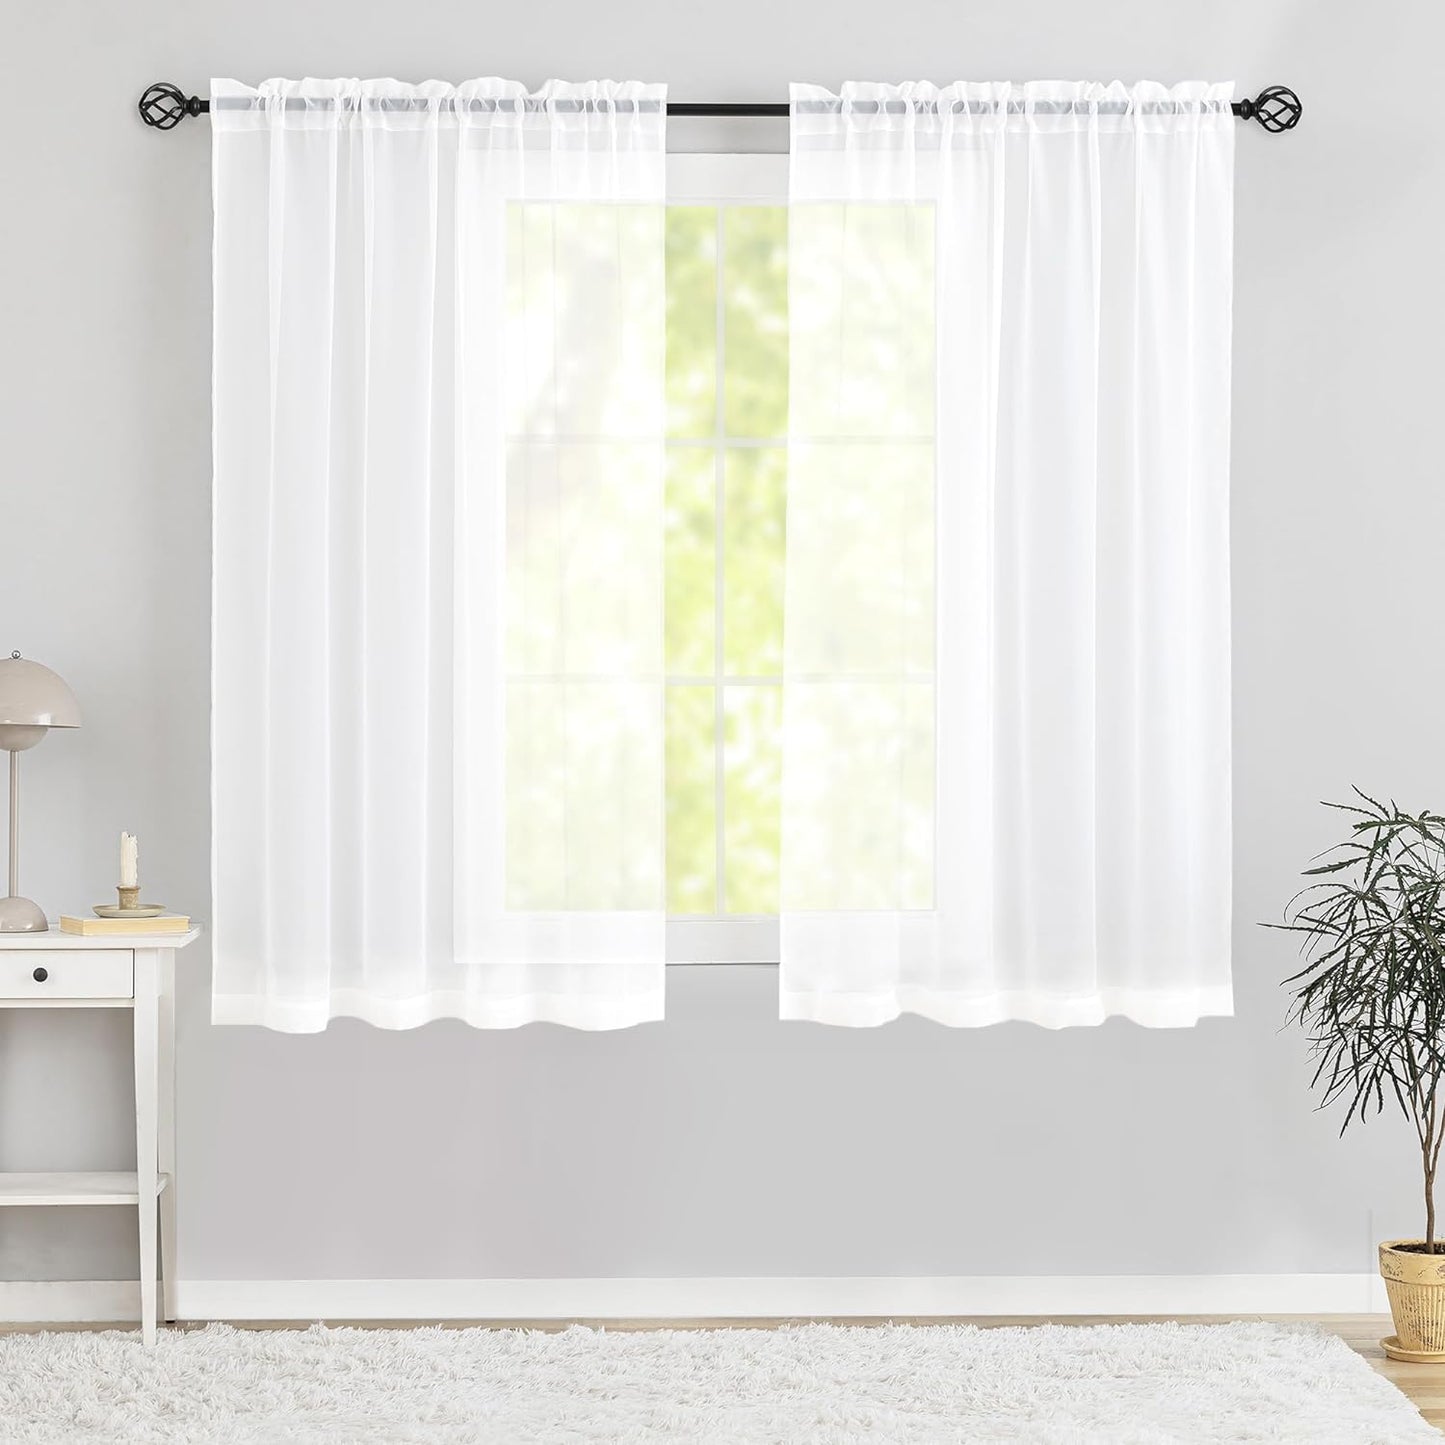 Semi Voile White Sheer Curtains 84 Inches Long 2 Panels Rod Pocket Window Treatment for Living Room Bedroom Dining Room(White 52" W X 84" L)  Karseteli White 52"W X 45"L 